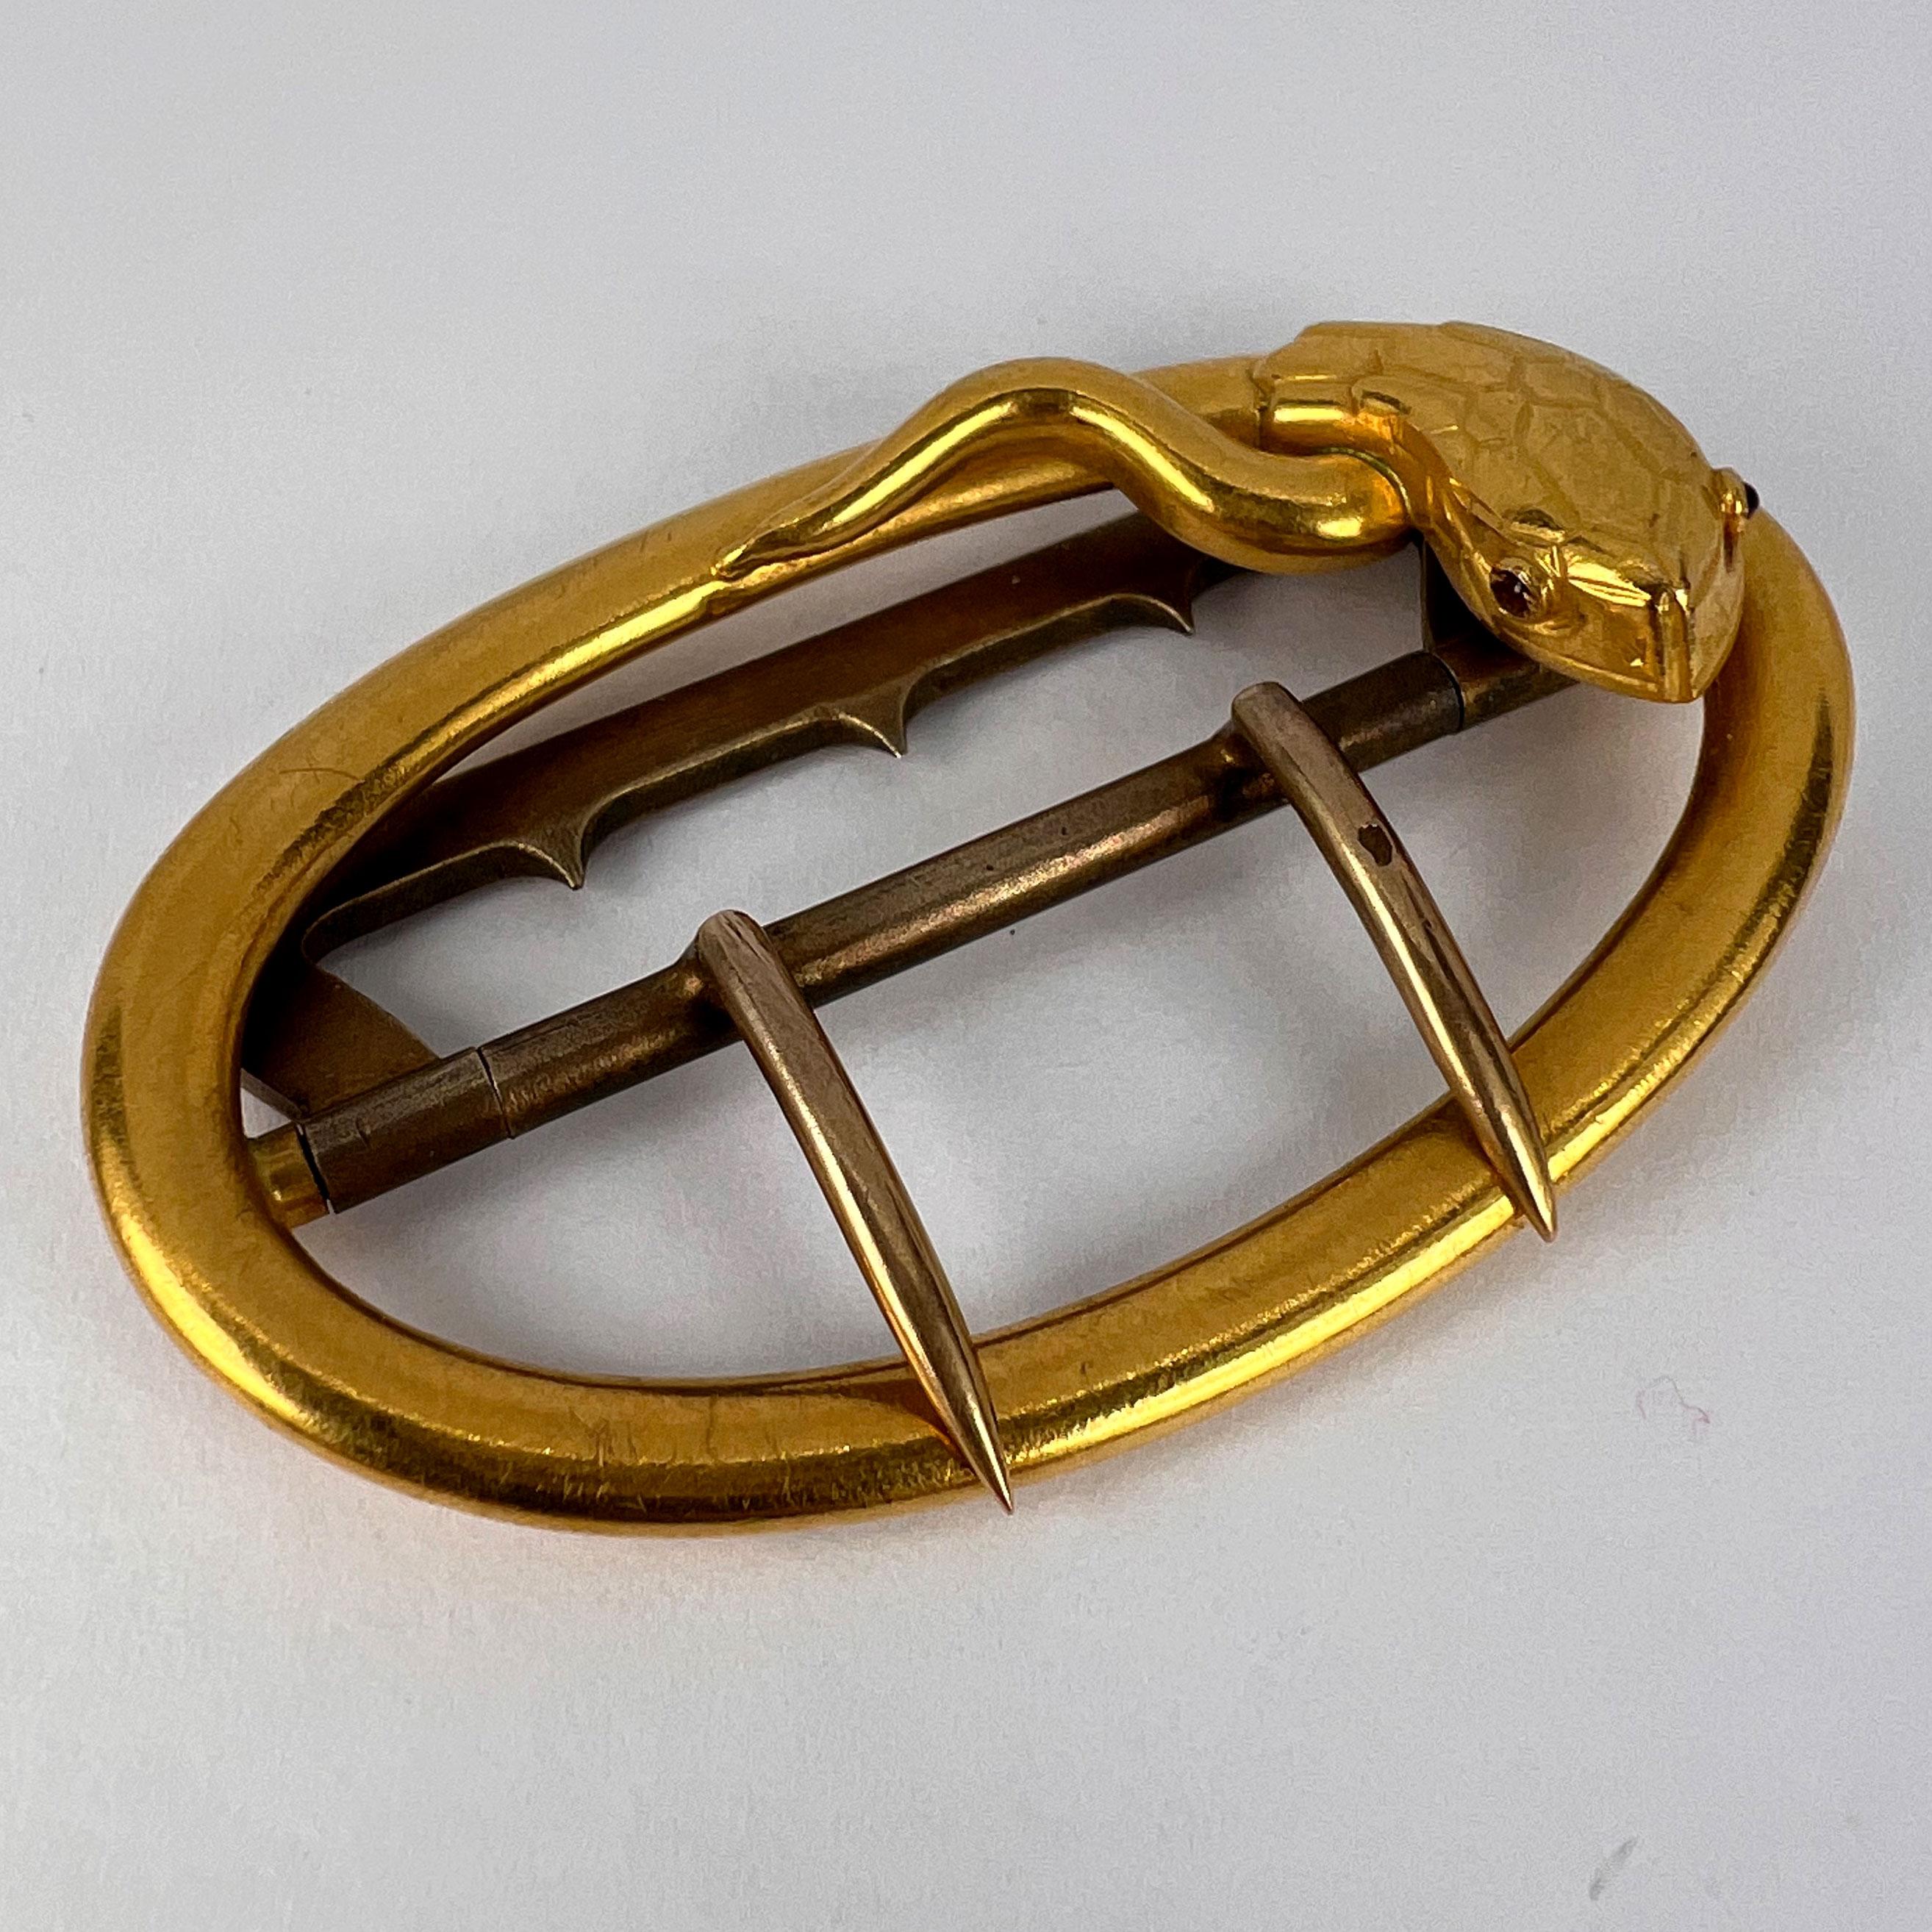 French 18K Yellow Gold Silver Garnet Snake Belt Buckle For Sale 2